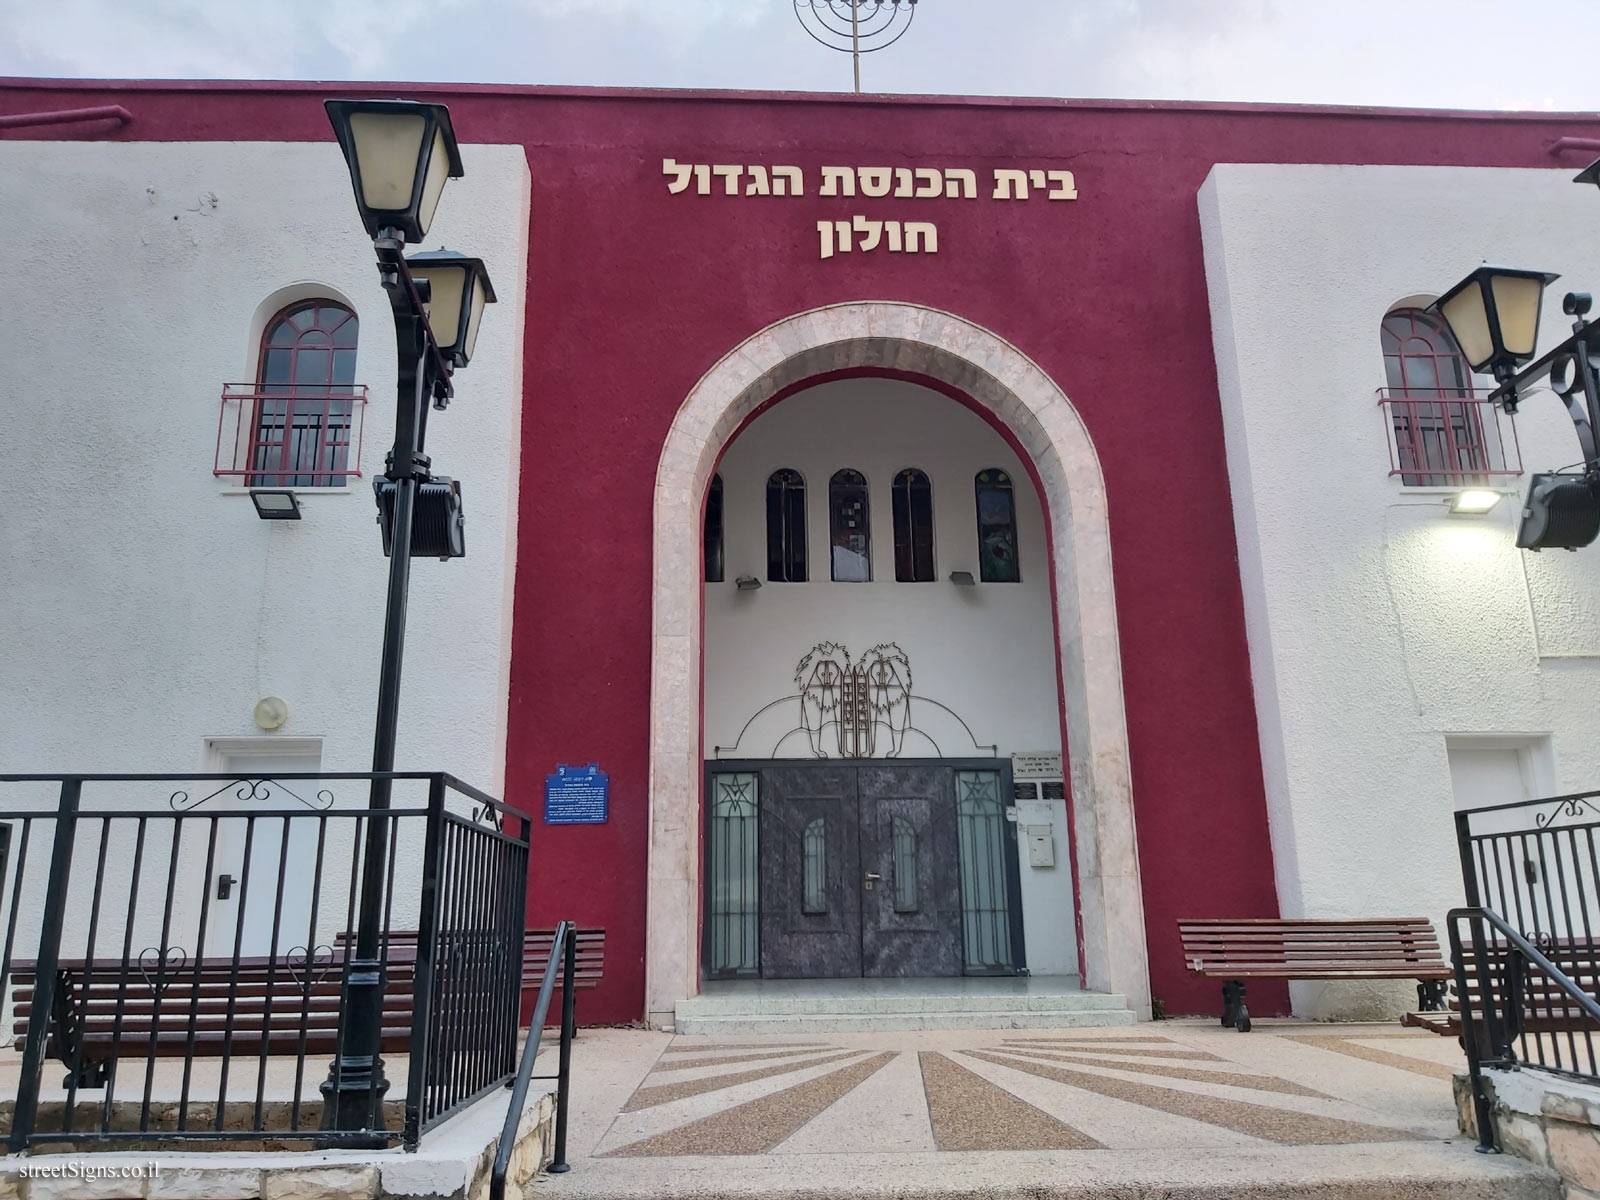 Holon - Heritage Sites in Israel - The Great Synagogue - HaRav Kuk St 5, Holon, Israel